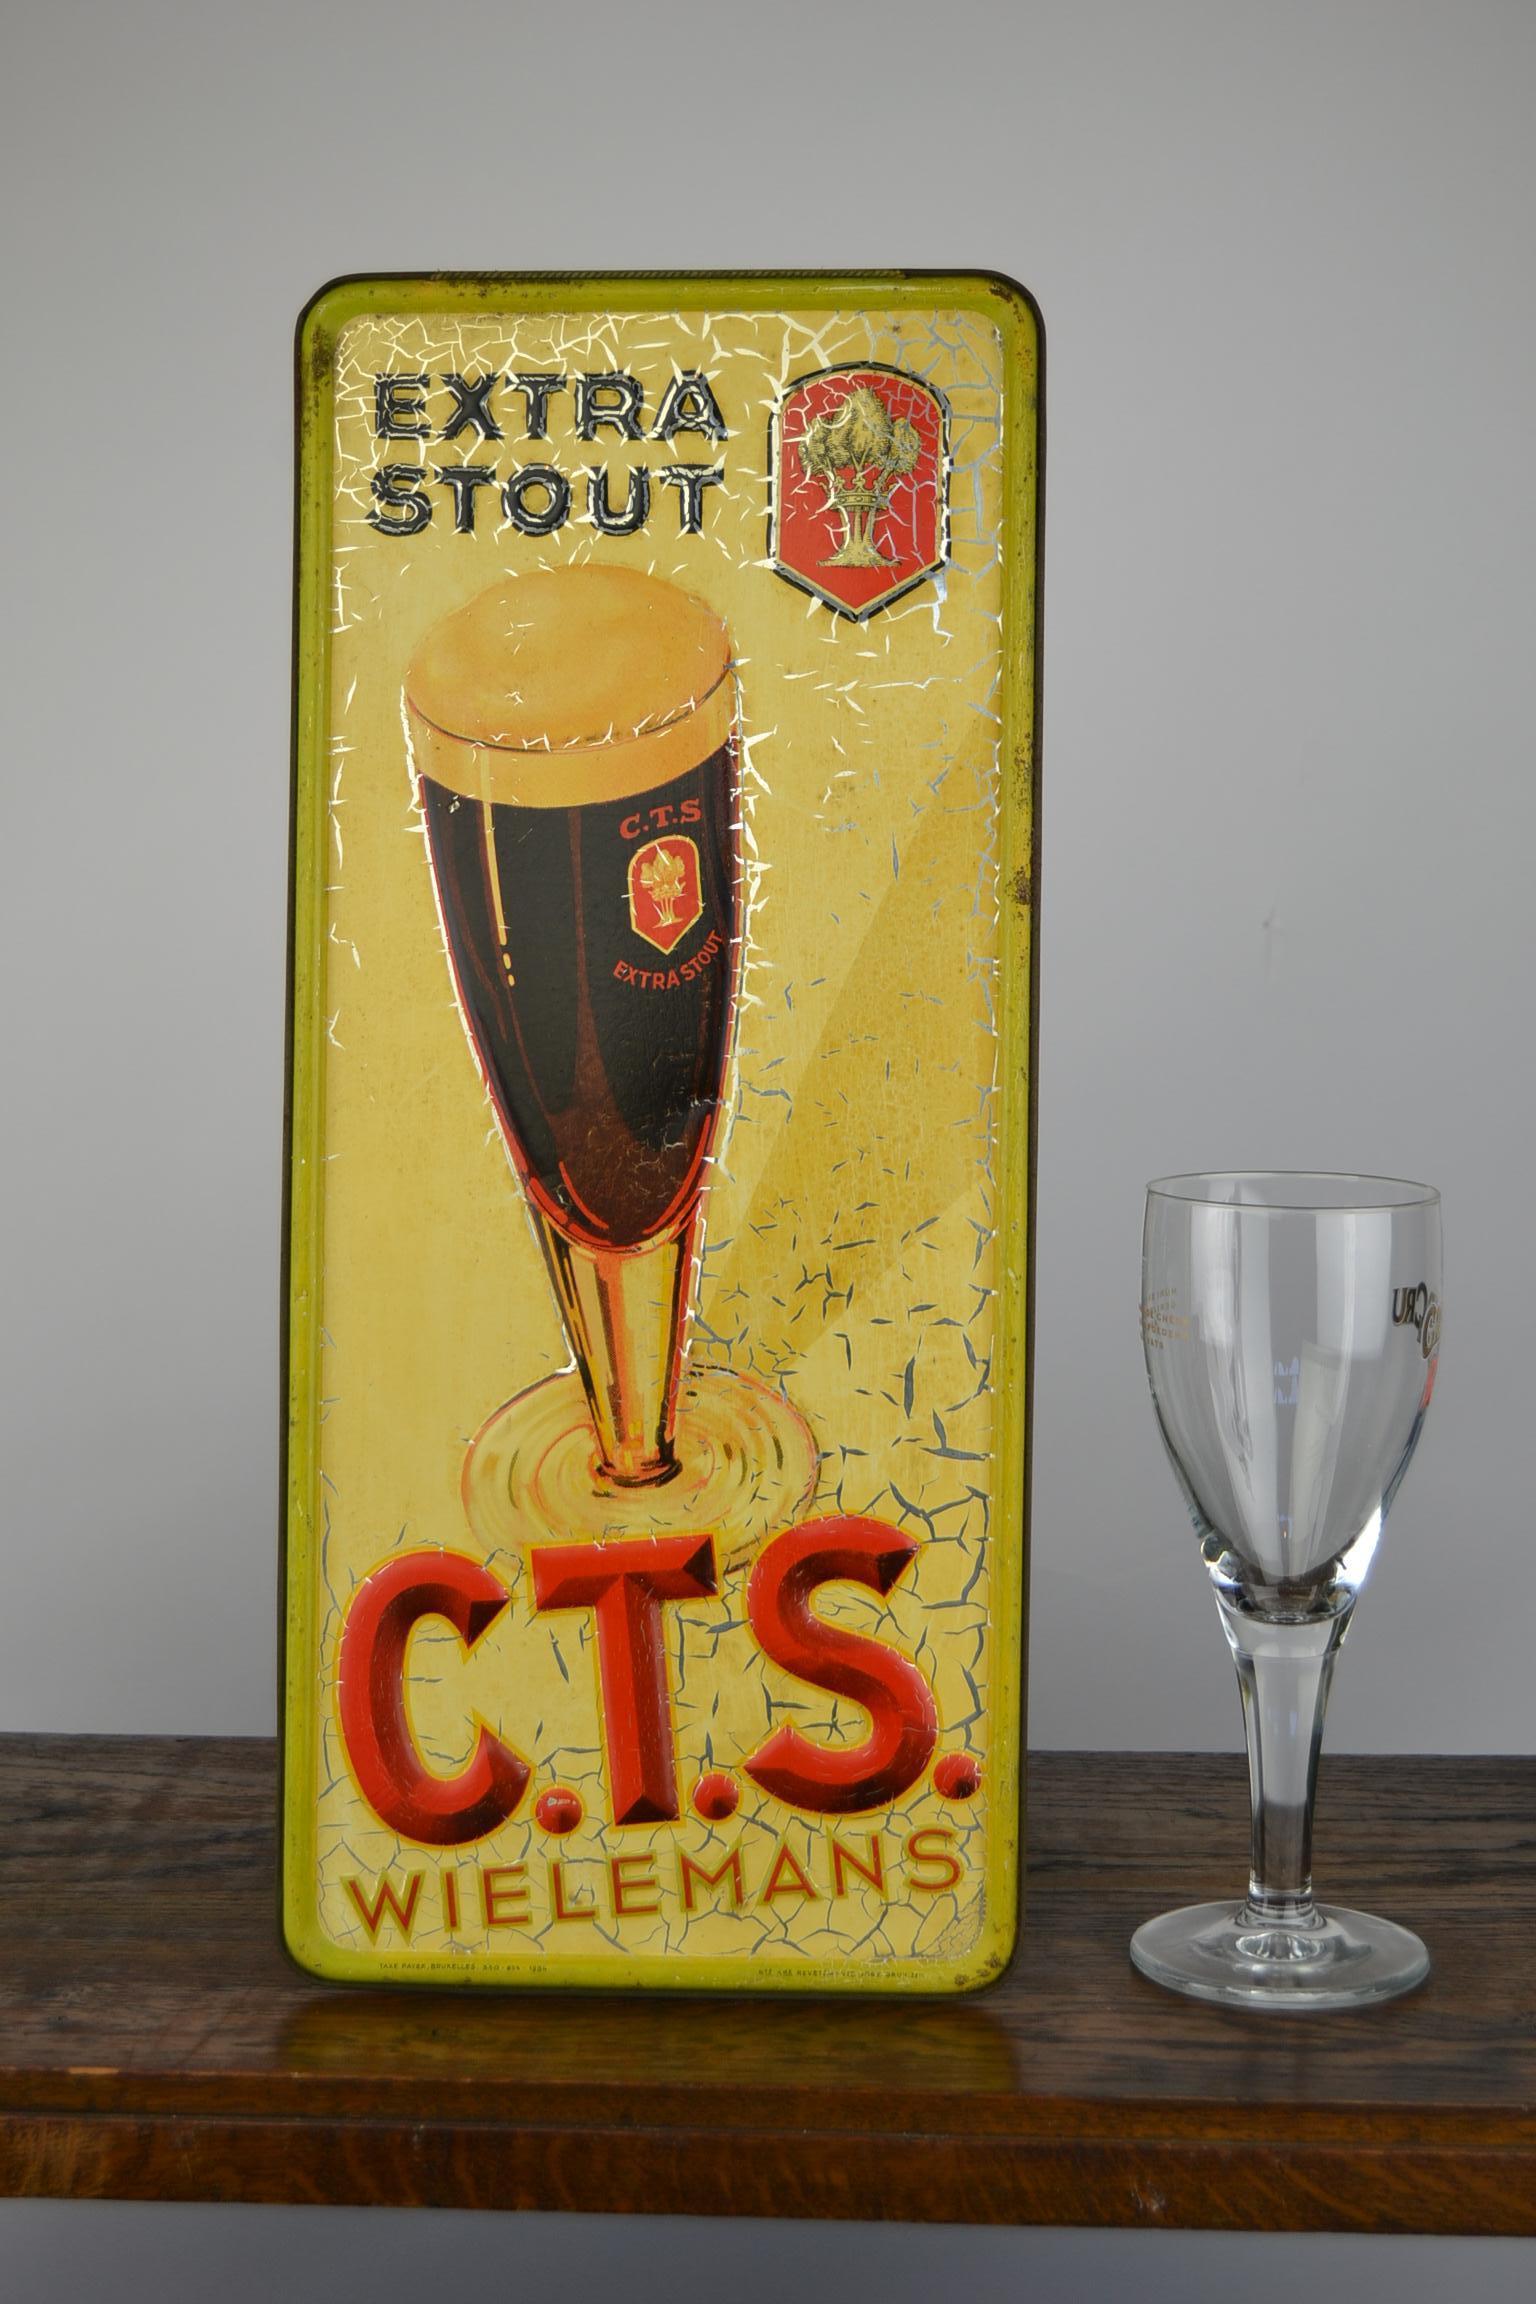 Antique tin sign for Belgian Beer of the brand Wielemans. 
This brewery was located in Brussels Belgium. 
The embossed metal sign was designed for the dark beer called Stout. 
Advertising sign was made in Brussels and dated 1934. 
It shows the